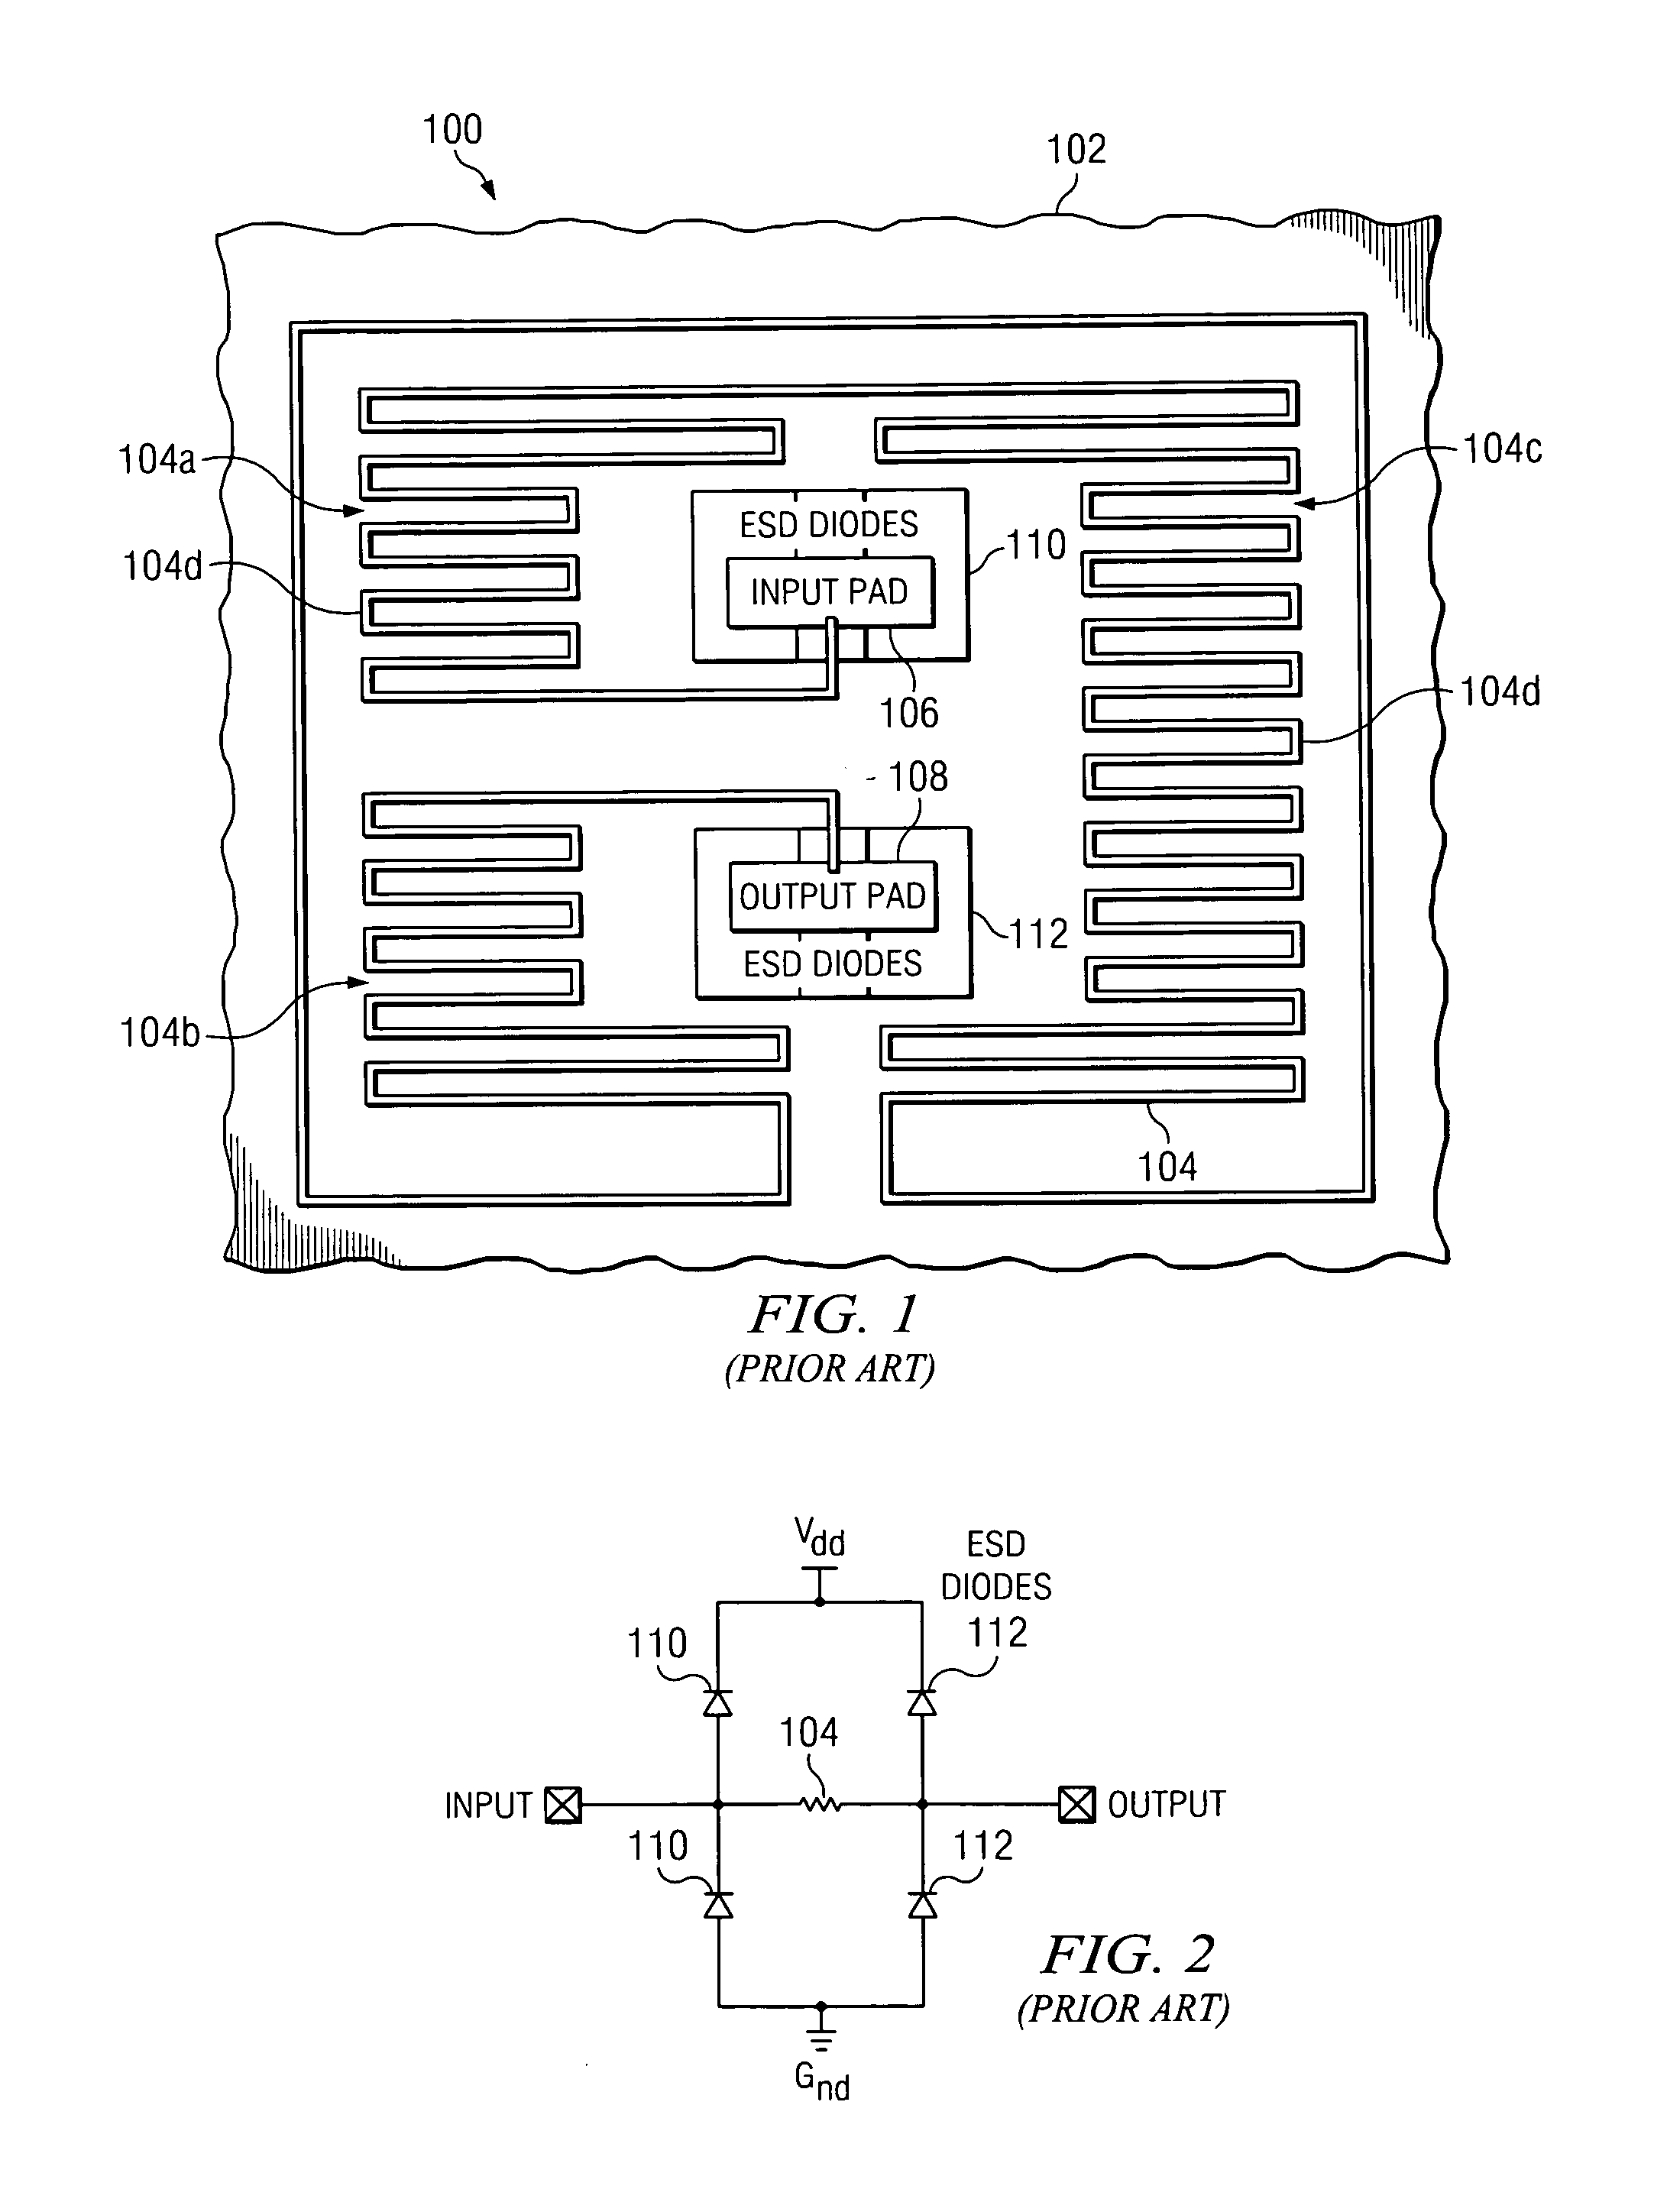 Multi-layered thermal sensor for integrated circuits and other layered structures